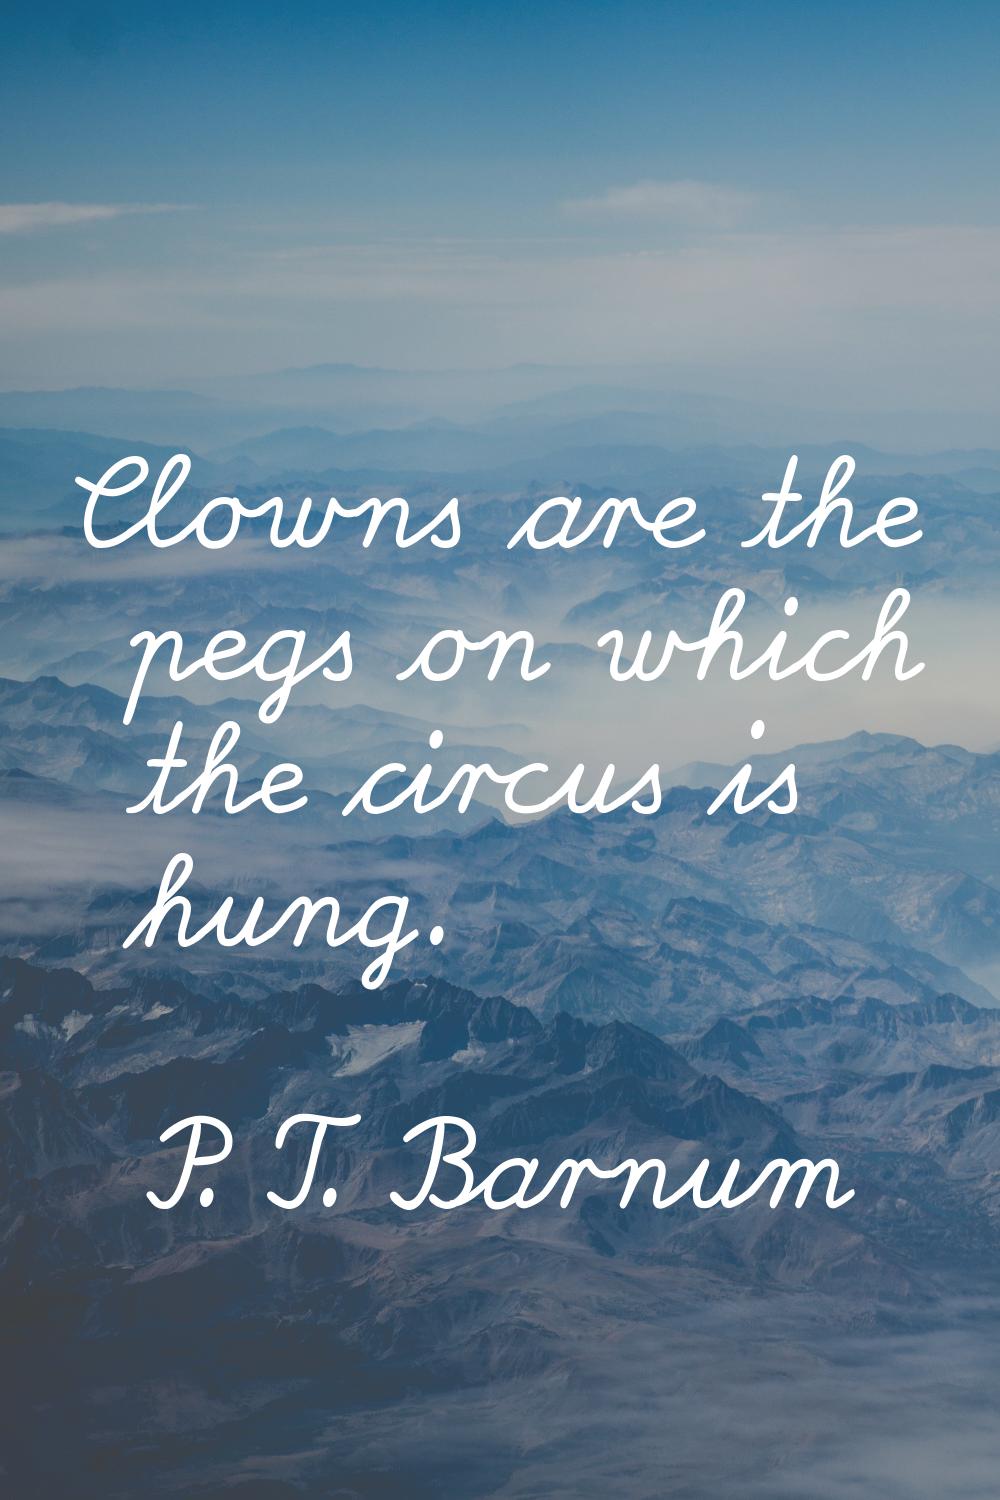 Clowns are the pegs on which the circus is hung.